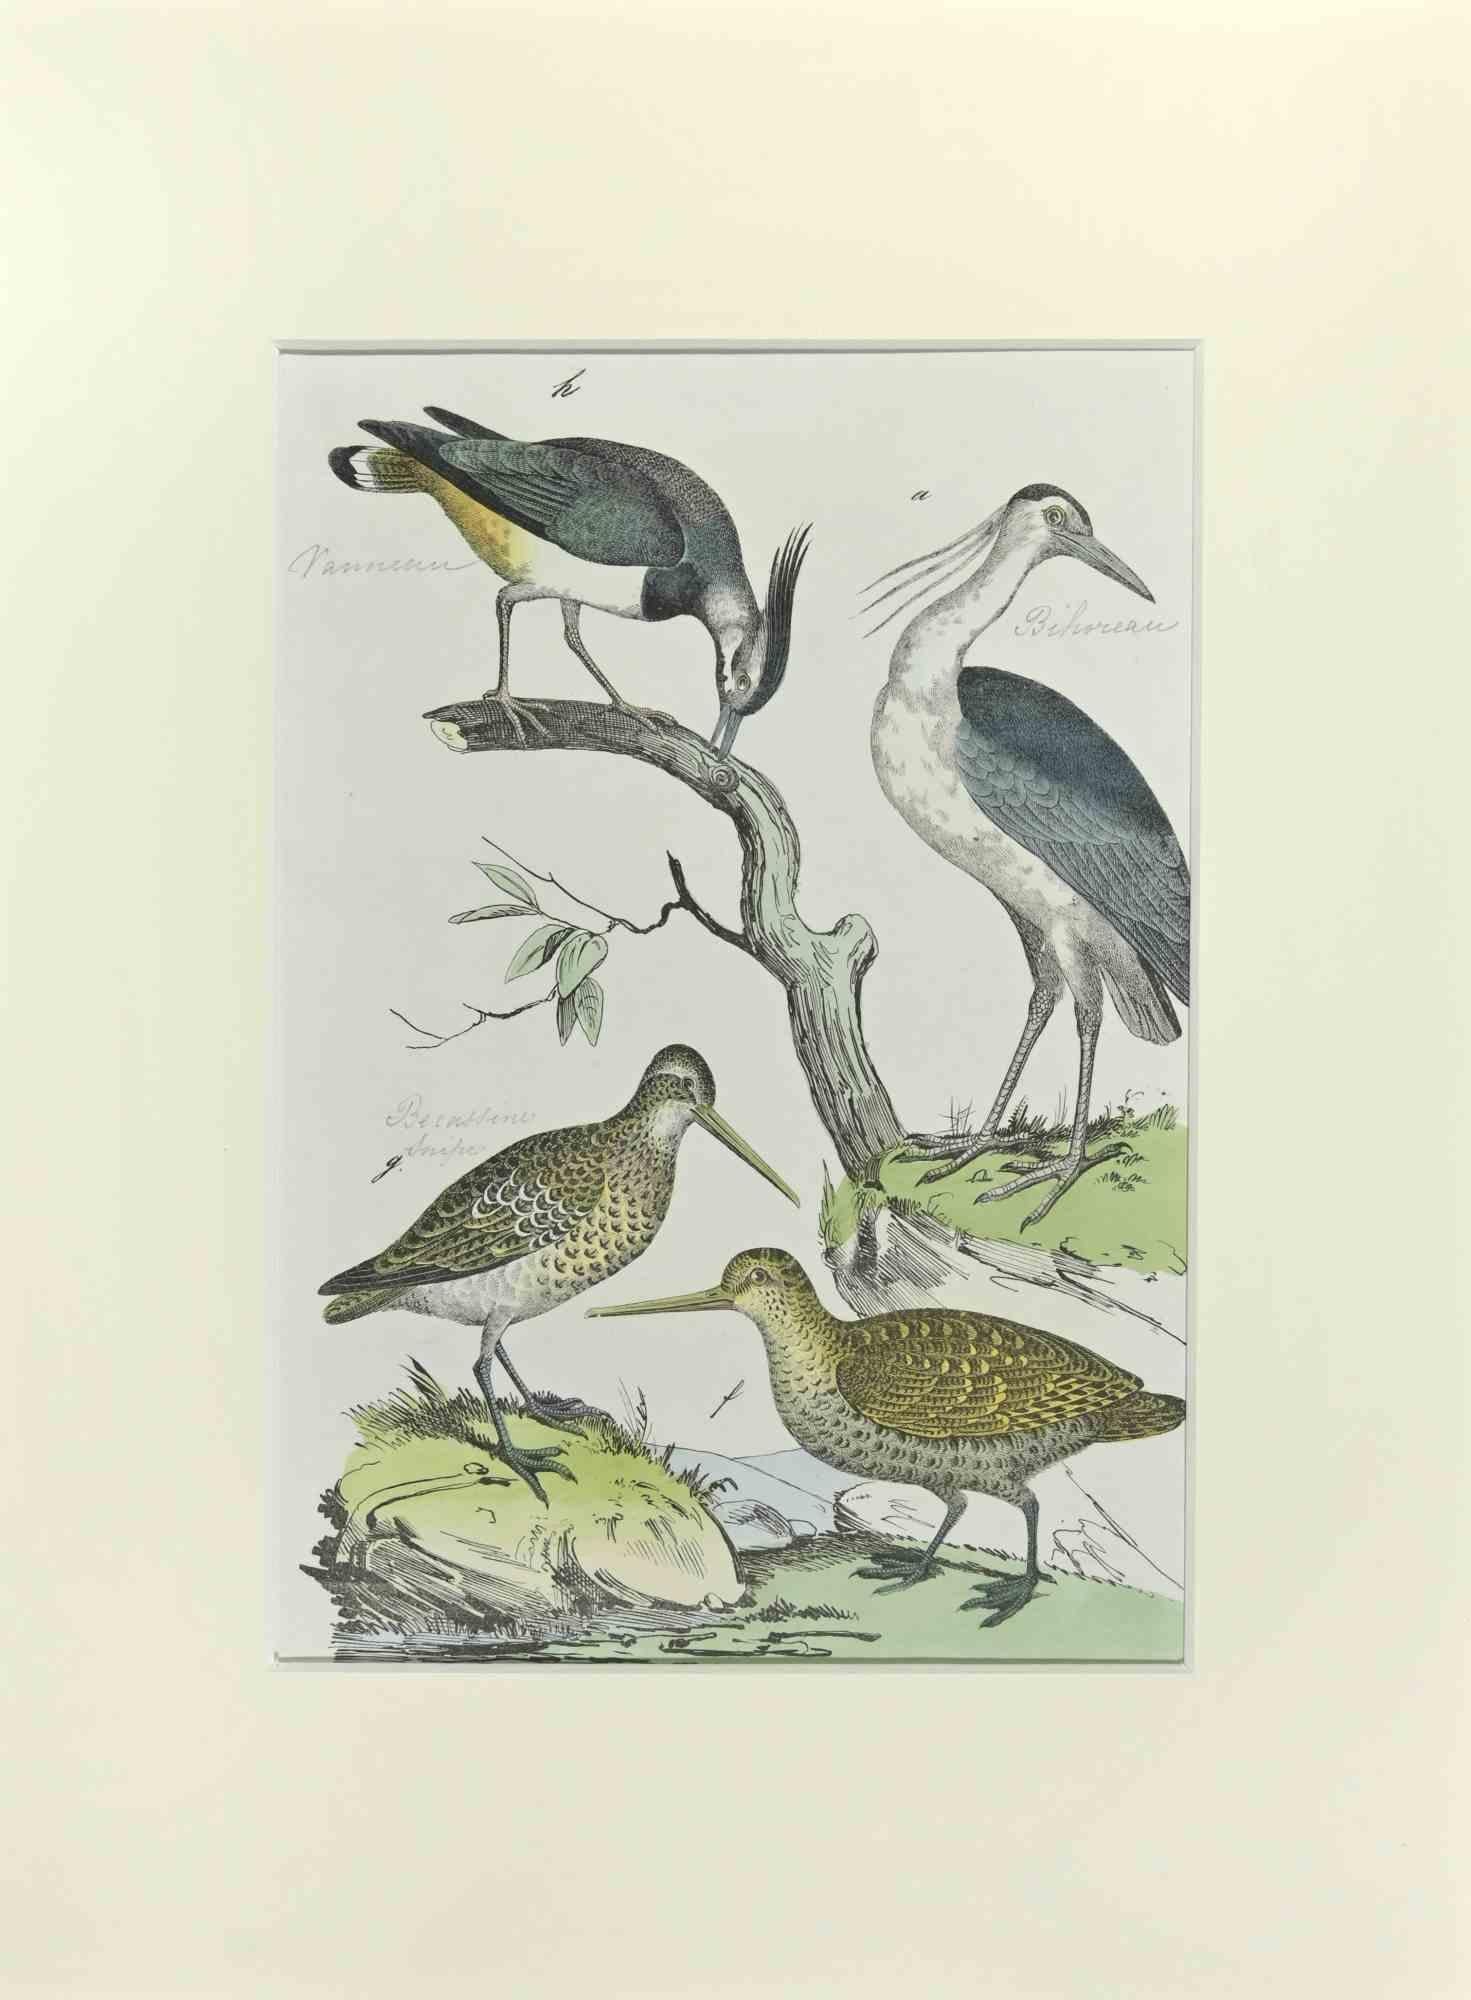 Woodcock is an etching hand colored realized by Gotthilf Heinrich von Schubert - Johann Friedrich Naumann, Illustration from Natural history of birds in pictures, published by Stuttgart and Esslingen, Schreiber and Schill 1840 ca. 

Illustration